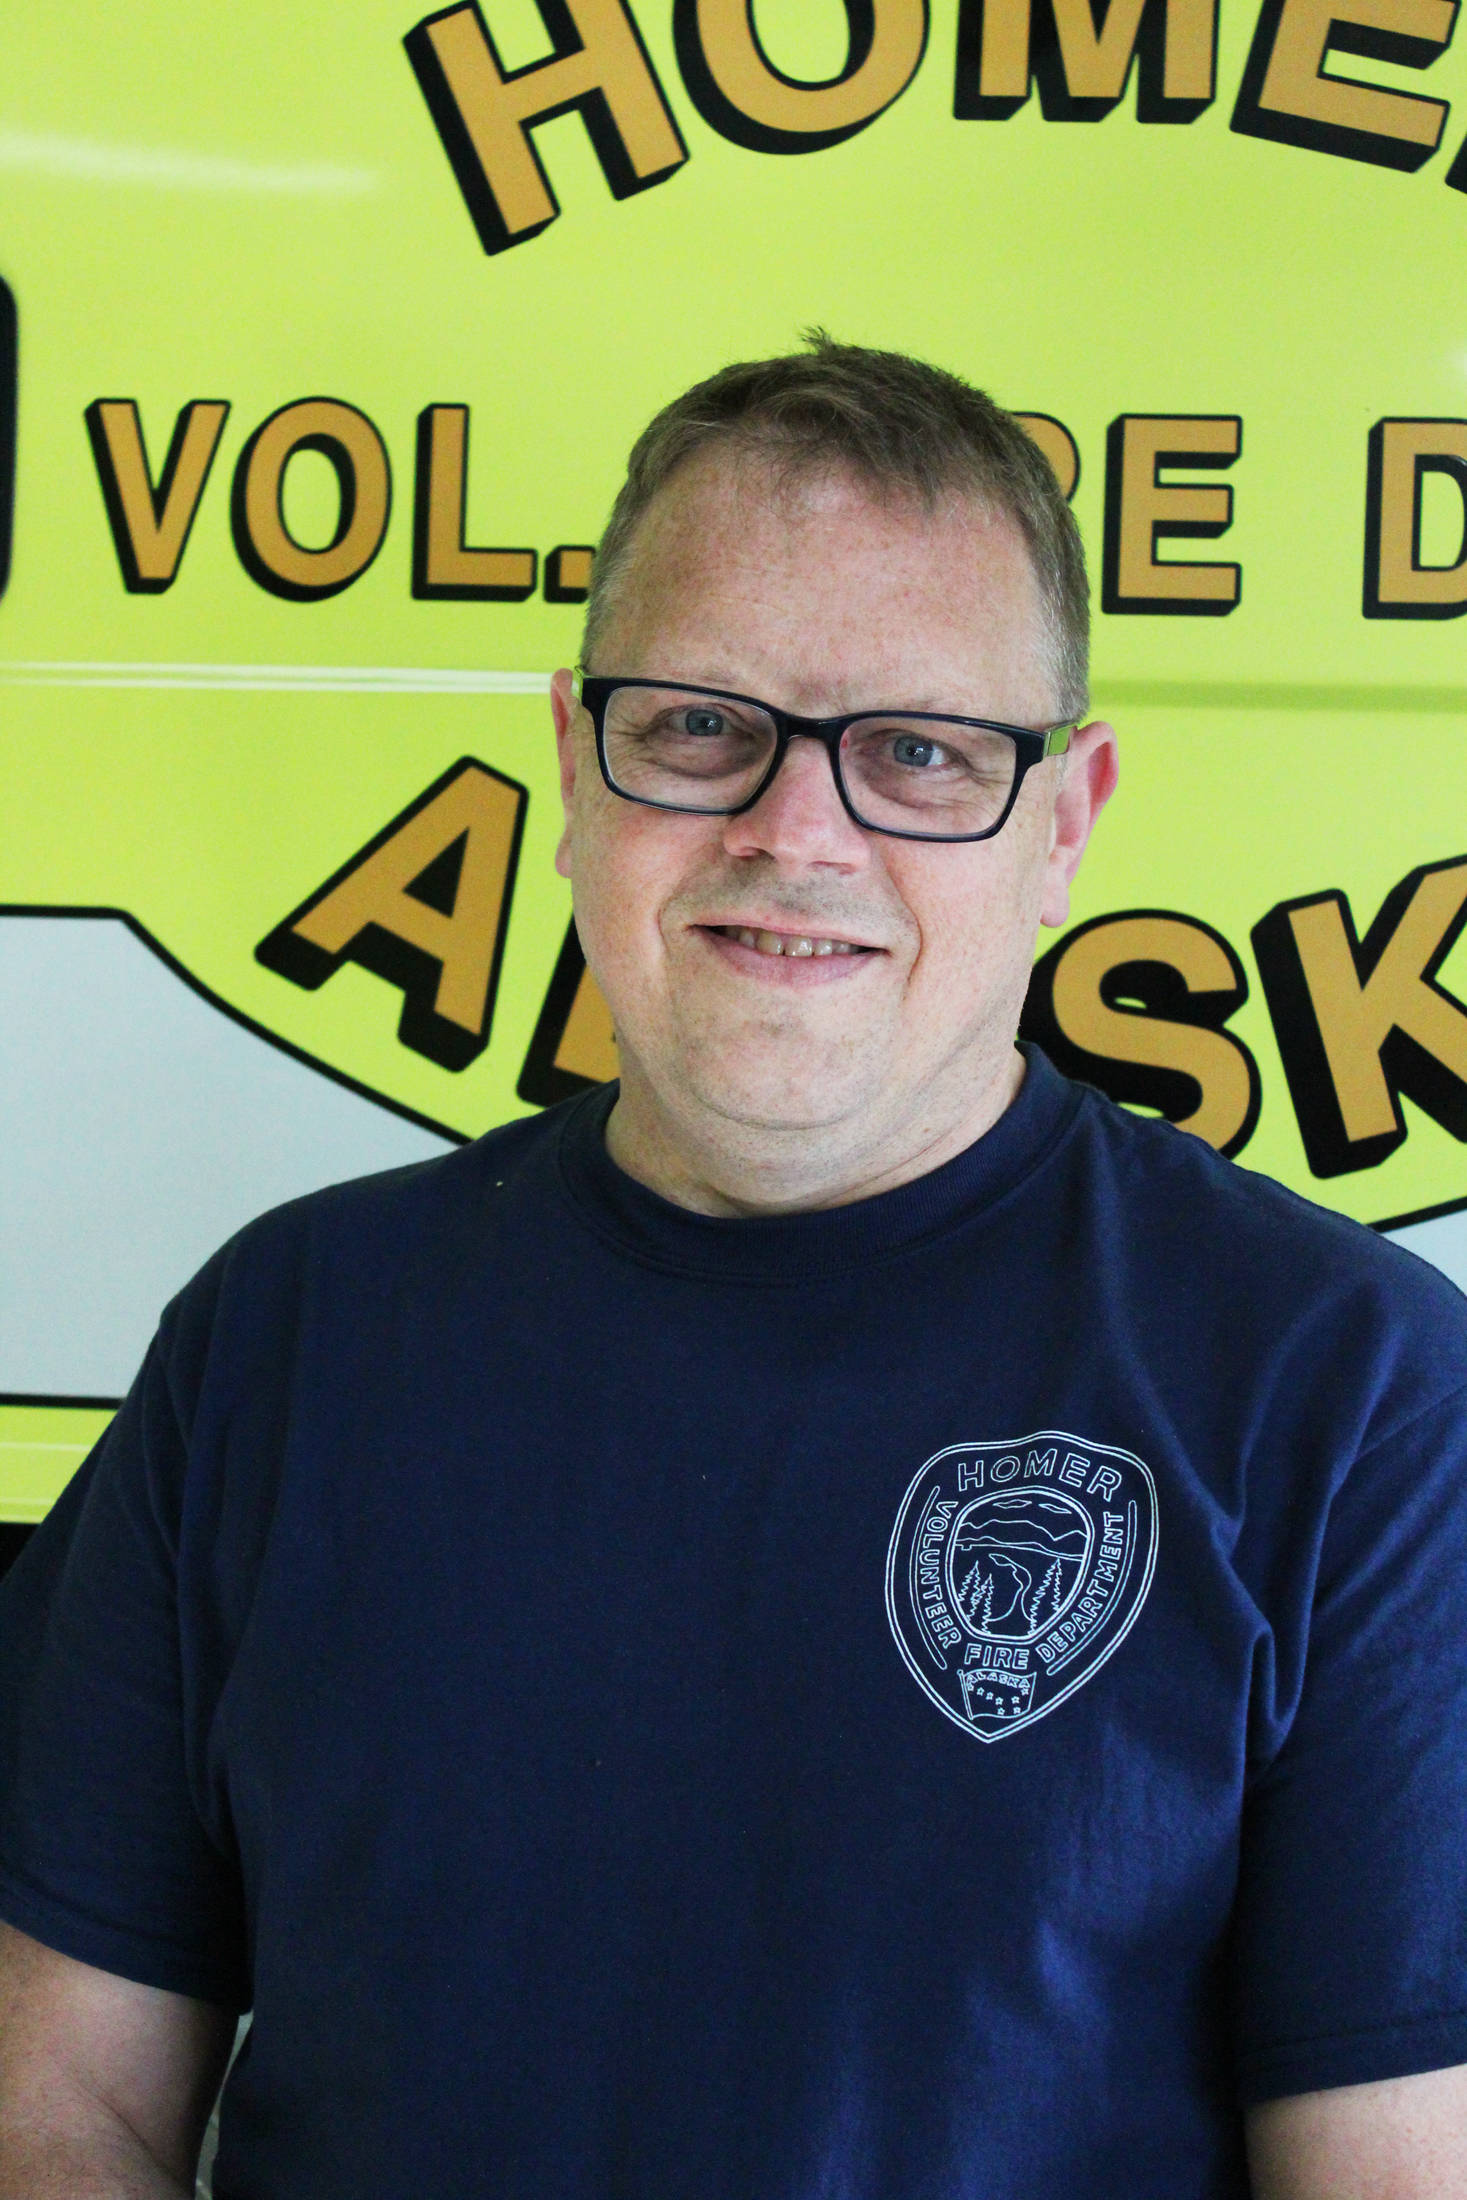 Homer Volunteer Fire Department Assistant Chief Terry Kadel, pictured at the station on Sept. 26, 2017 in Homer, Alaska, began at Homer Volunteer Fire Department on Sept. 18, 2017. He has now accepted the position of department chief. (Photo by Megan Pacer/Homer News)